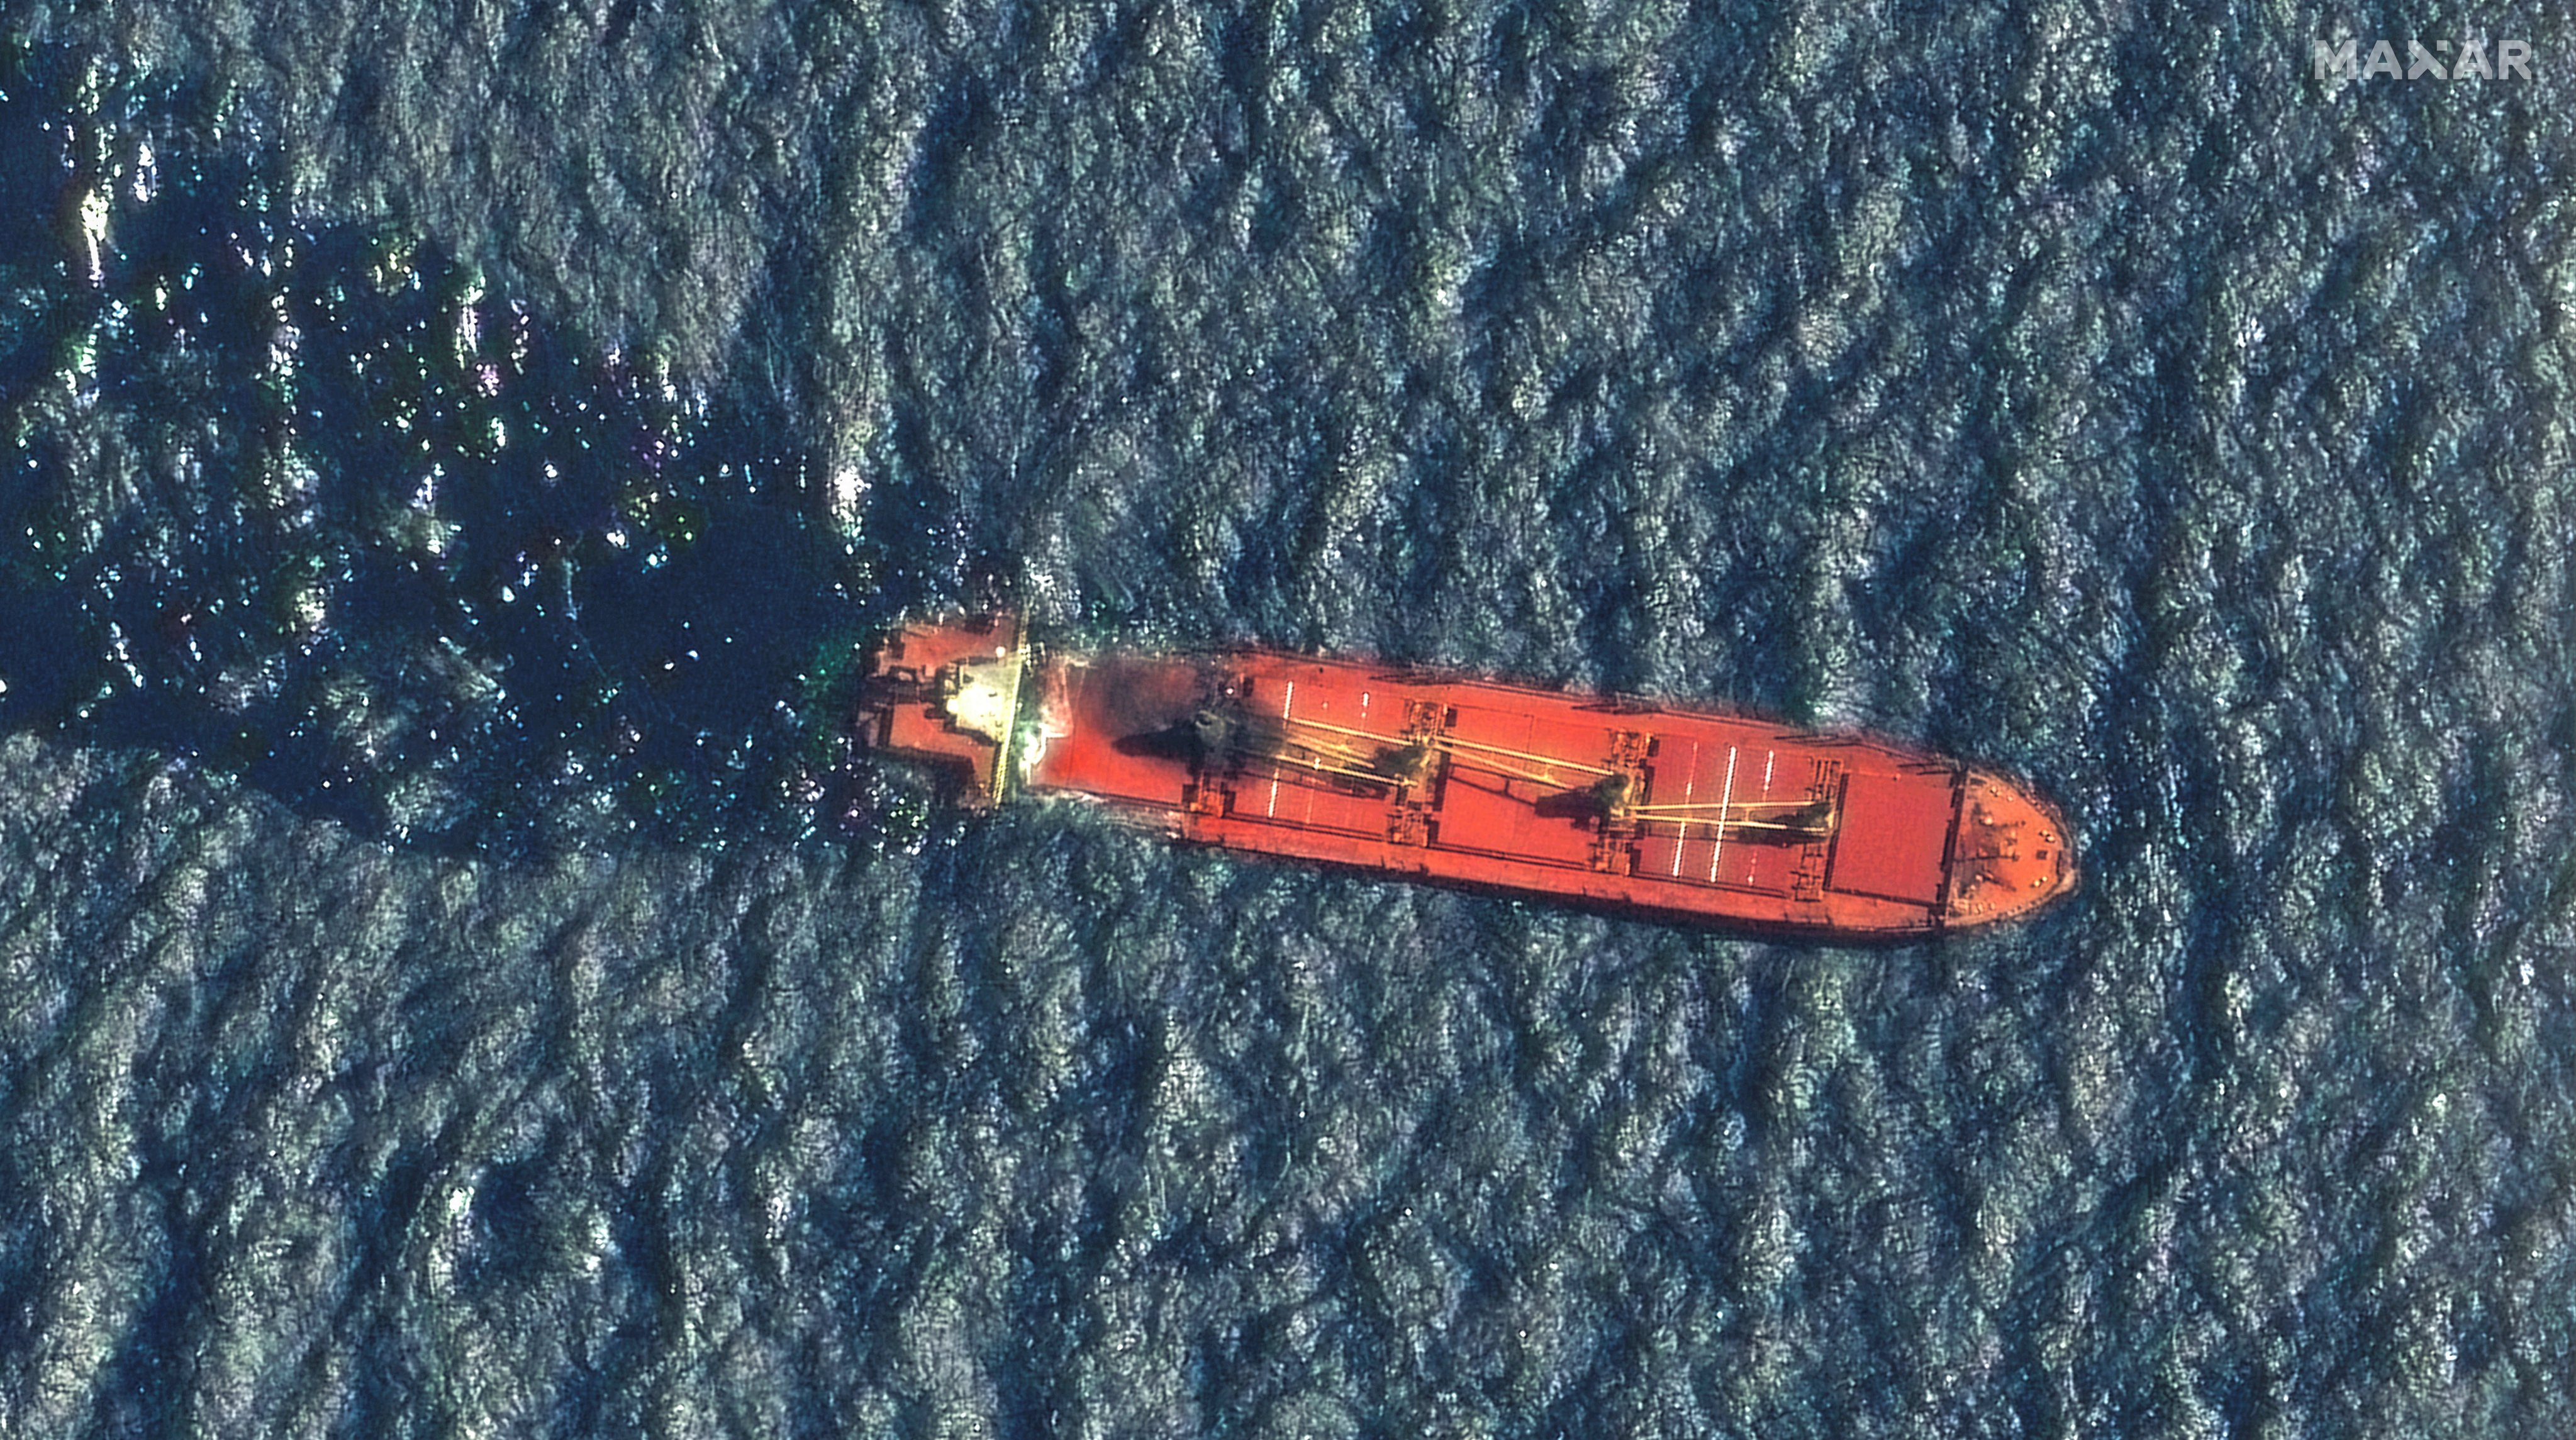 The Belize-flagged and UK-owned cargo ship Rubymar, which was attacked by Yemen’s Houthis, sunk after being attacked in the Red Sea. Photo: Maxar Technologies/Handout via Reuters